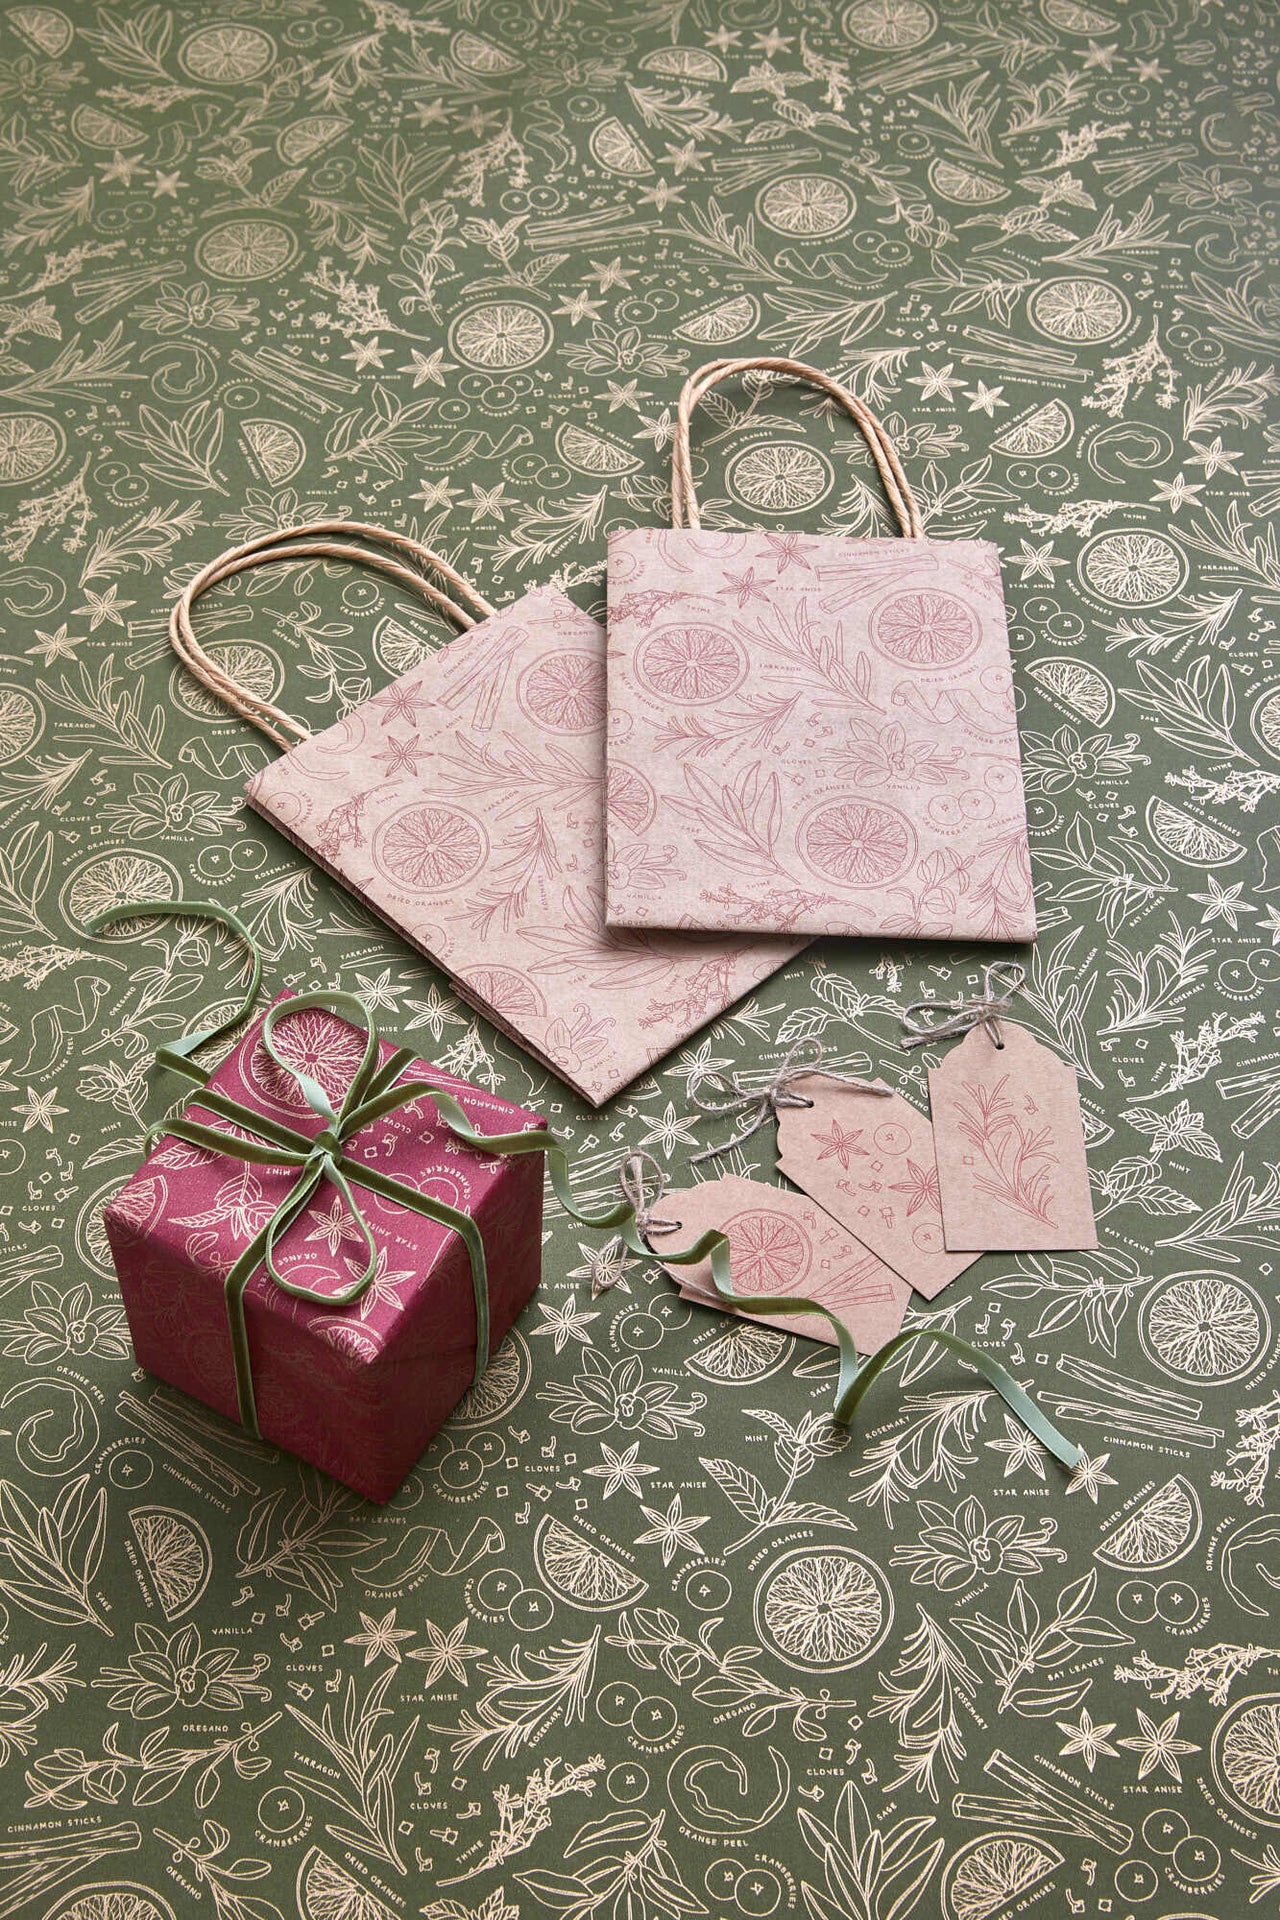 19 Piece Sugar & Spice Wrapping Paper, Ribbon, Gift Tag & Bag Set